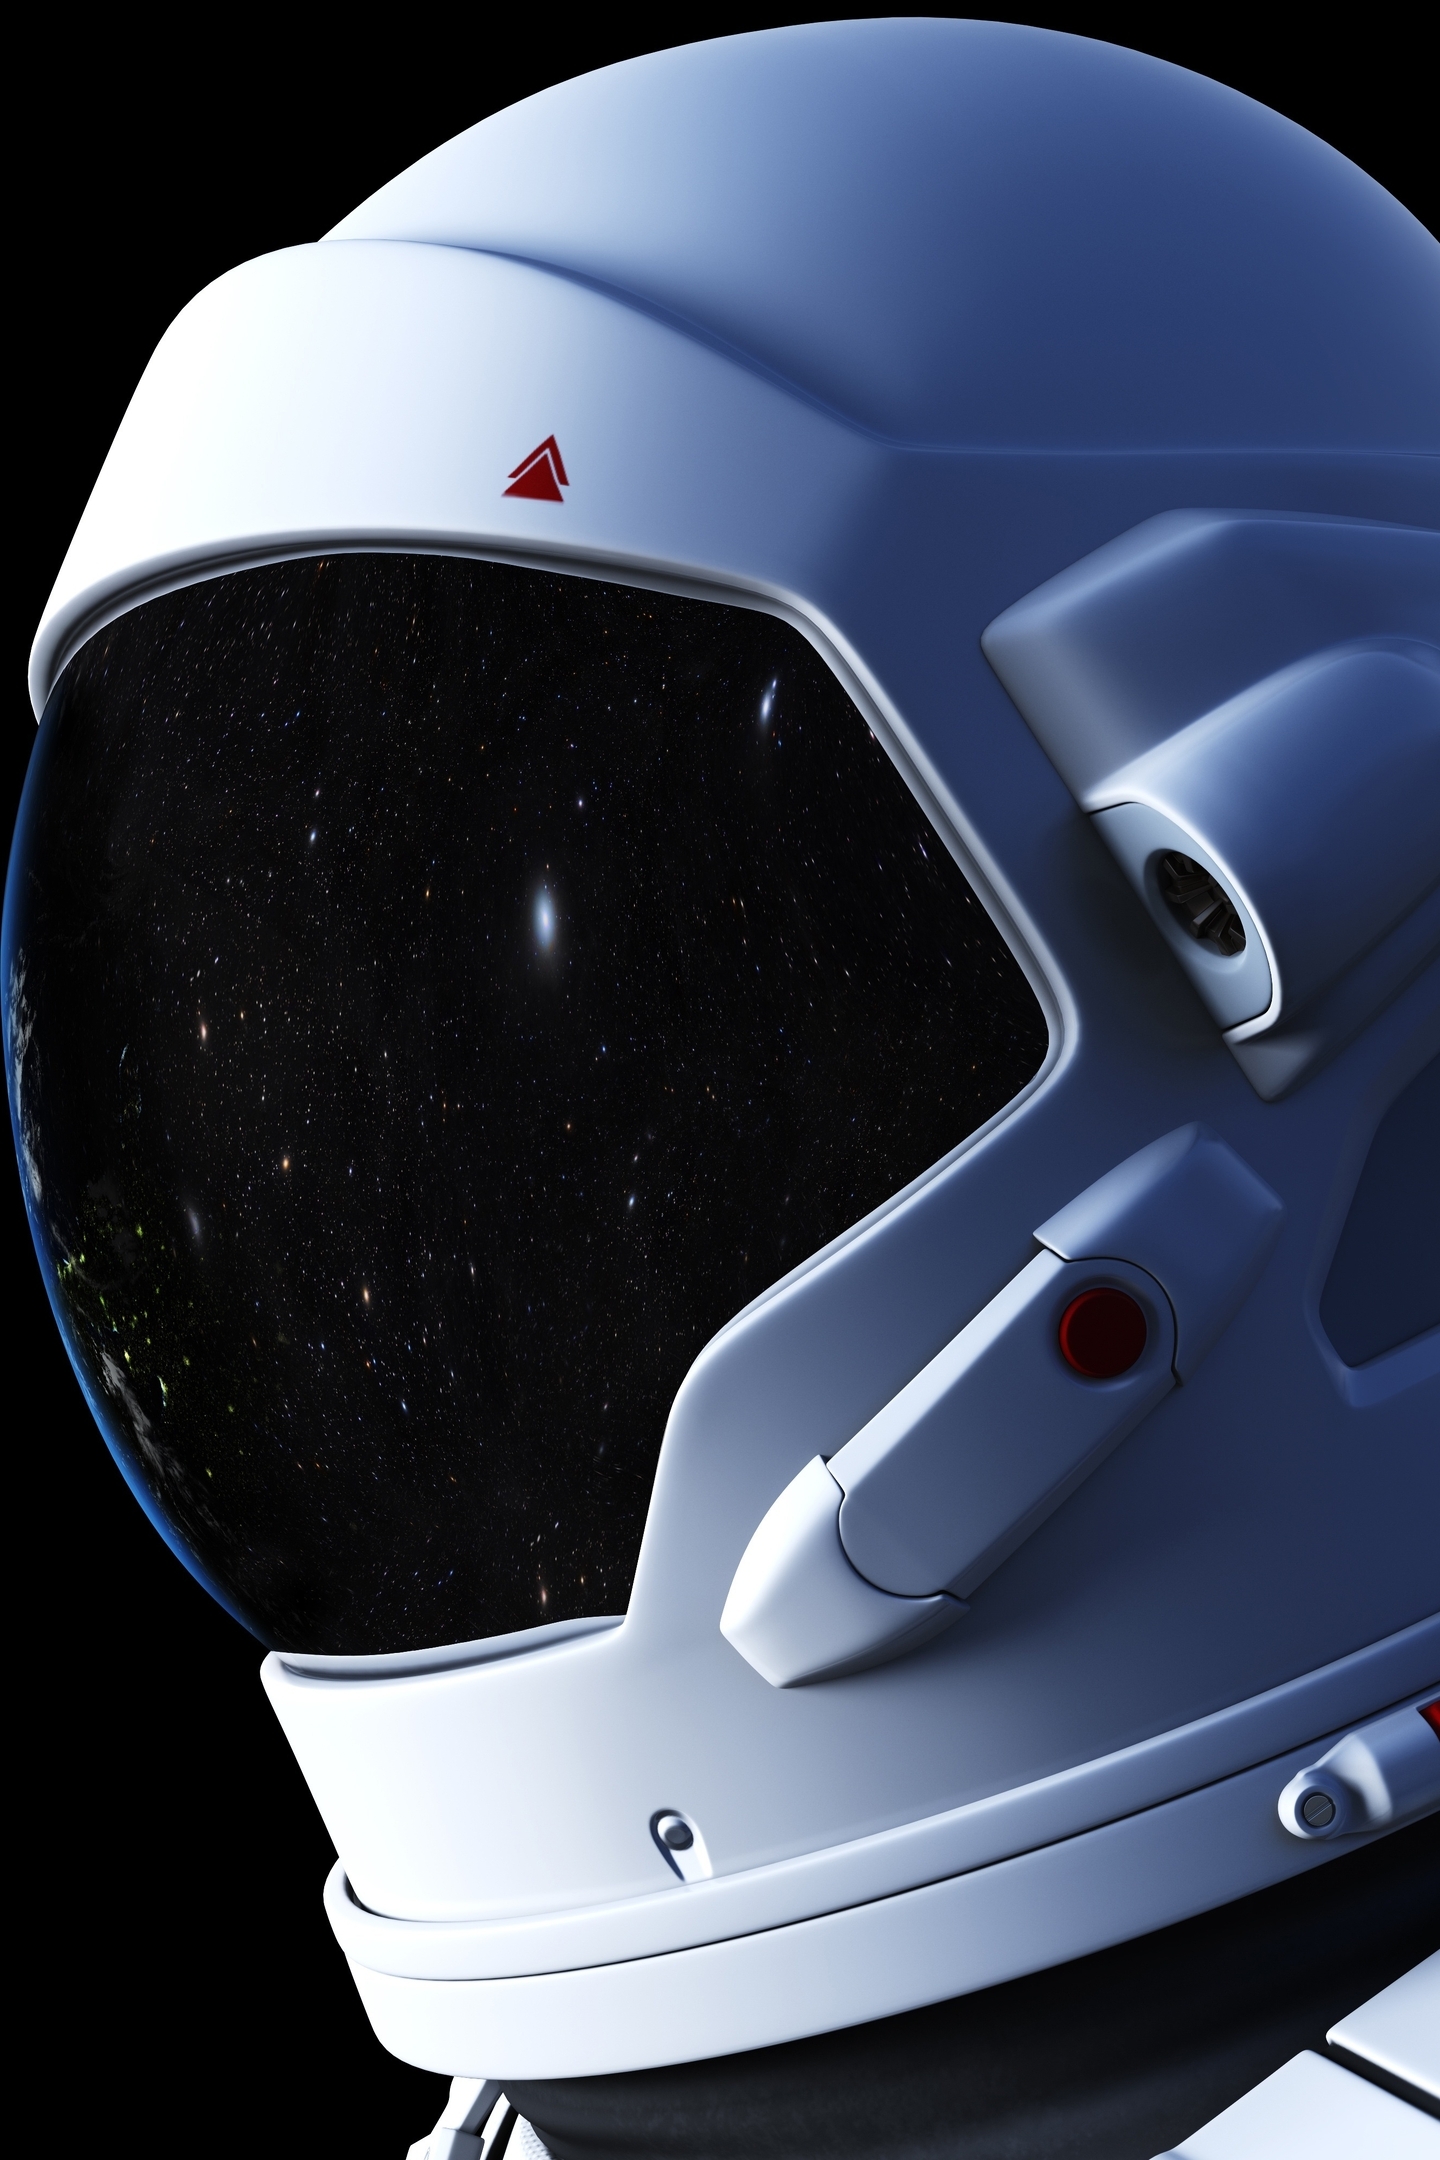 Image: Astronaut, spacesuit, space, planet, Earth, light, reflection, stars